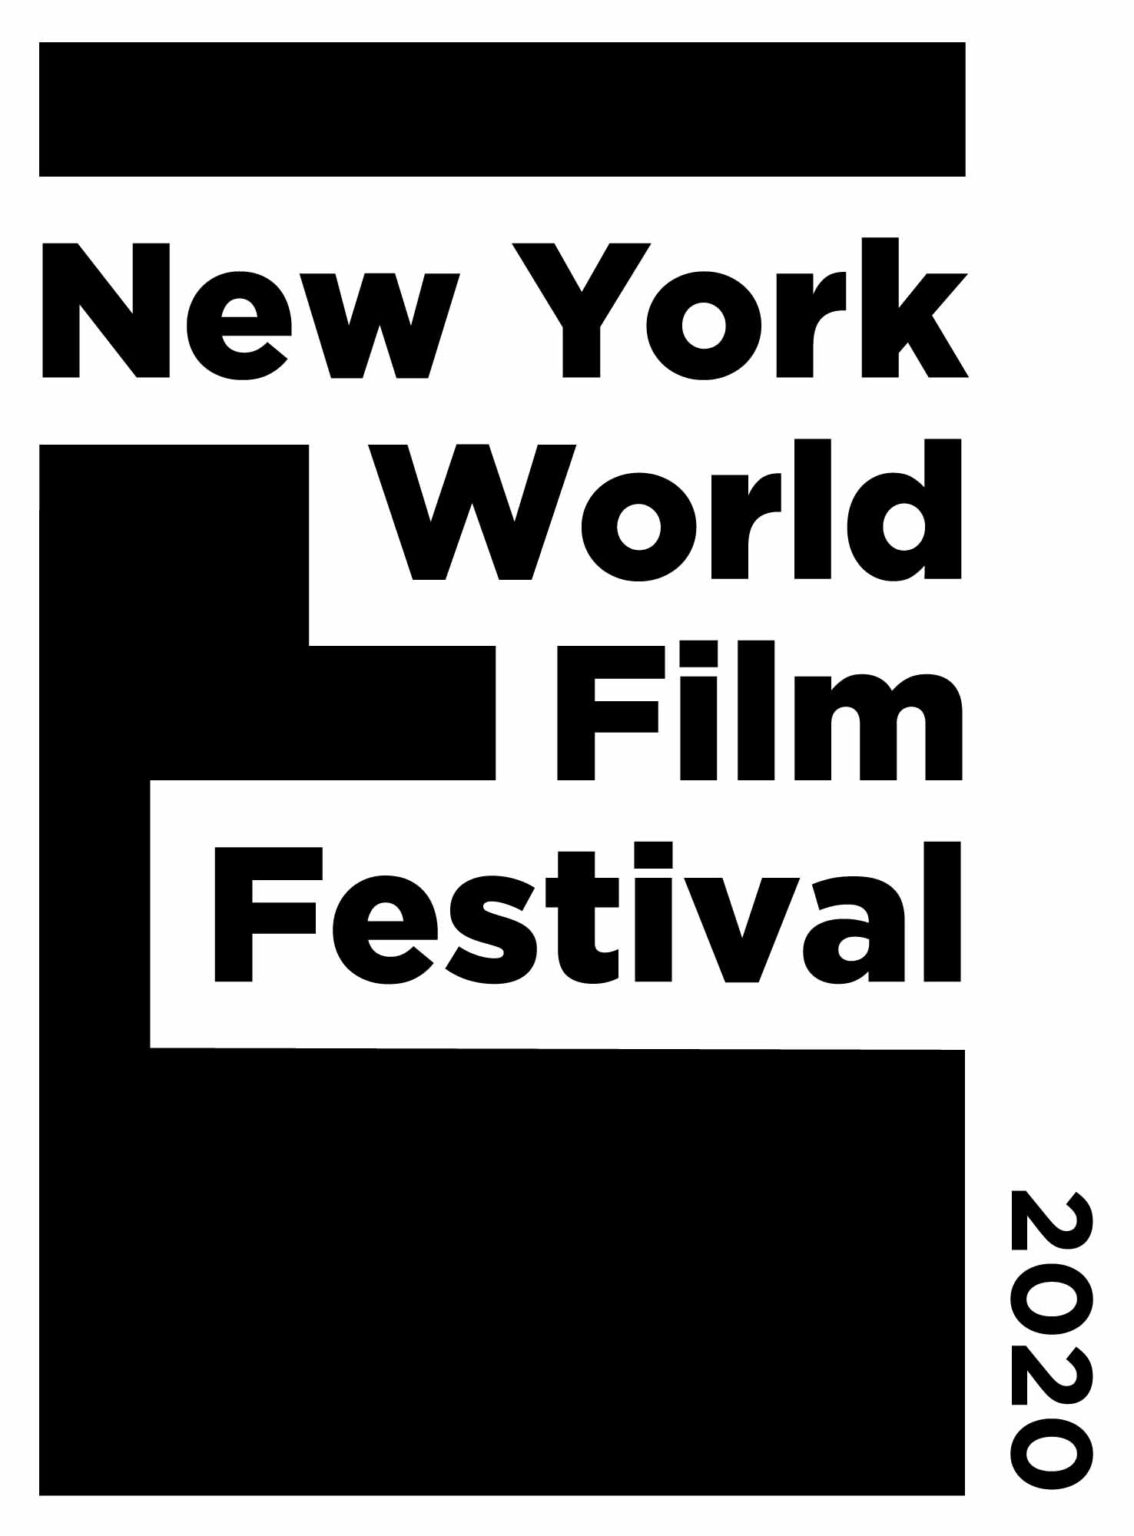 The first ever New York World Film Festival was supposed to occur back in April. But just as the world's changed, so has this year's event.